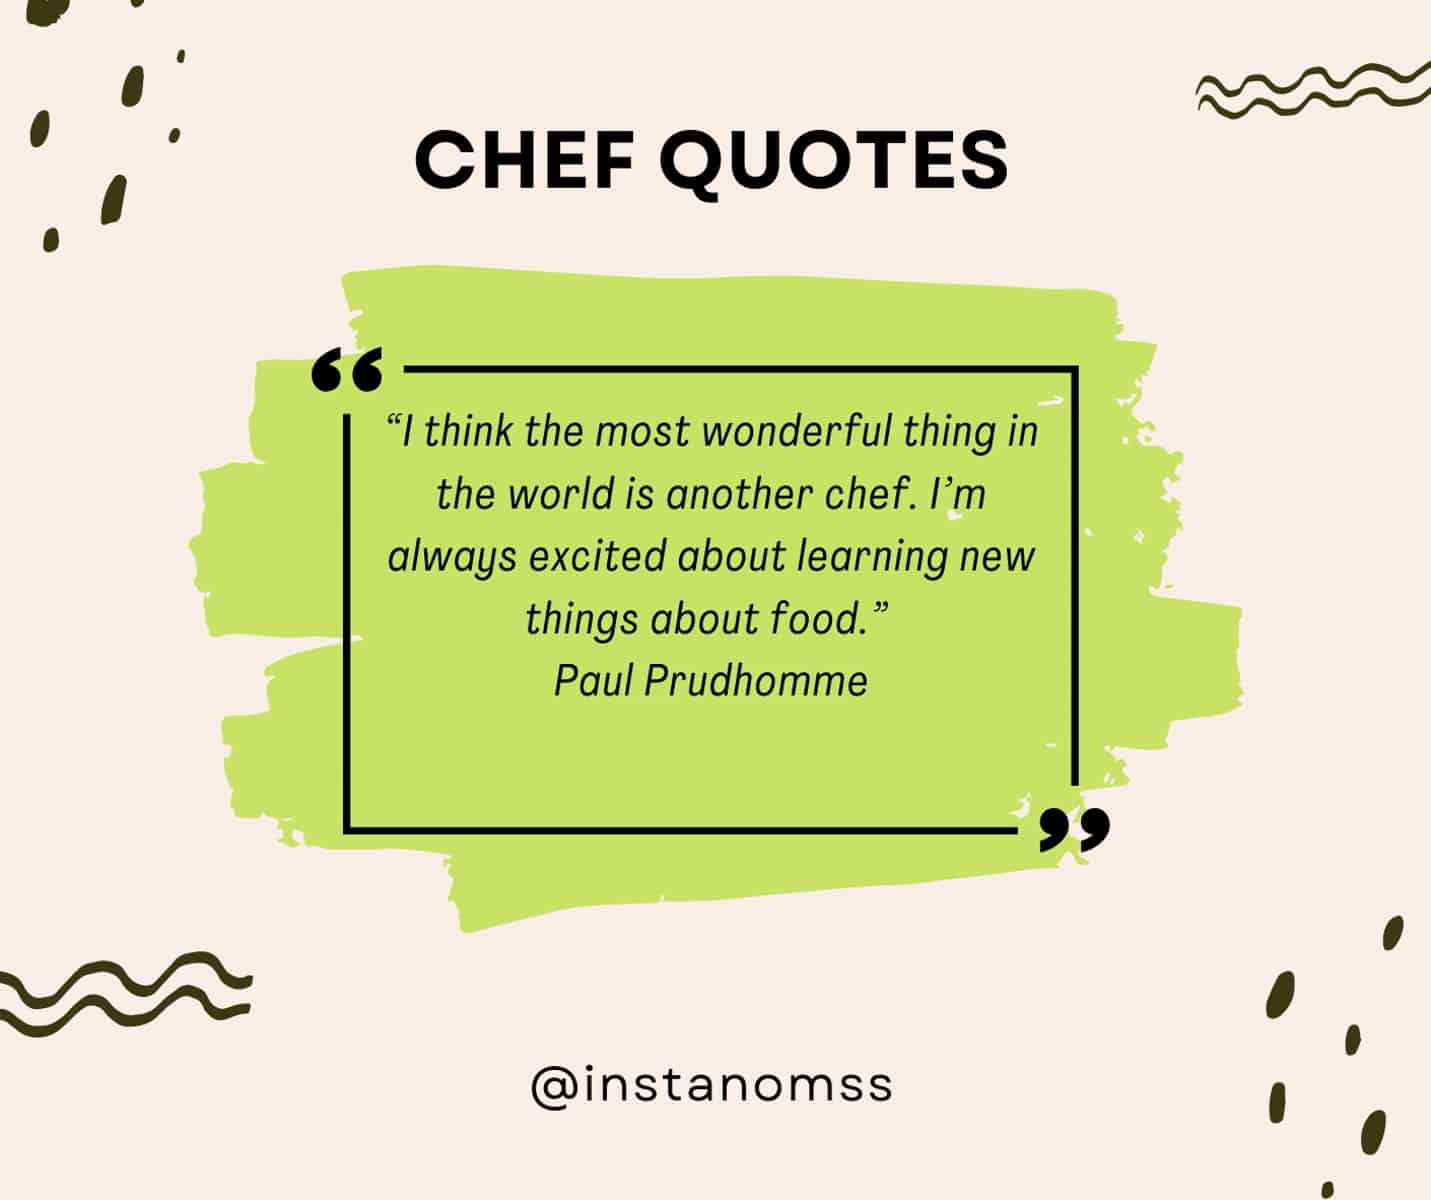 “I think the most wonderful thing in the world is another chef. I’m always excited about learning new things about food.” Paul Prudhomme